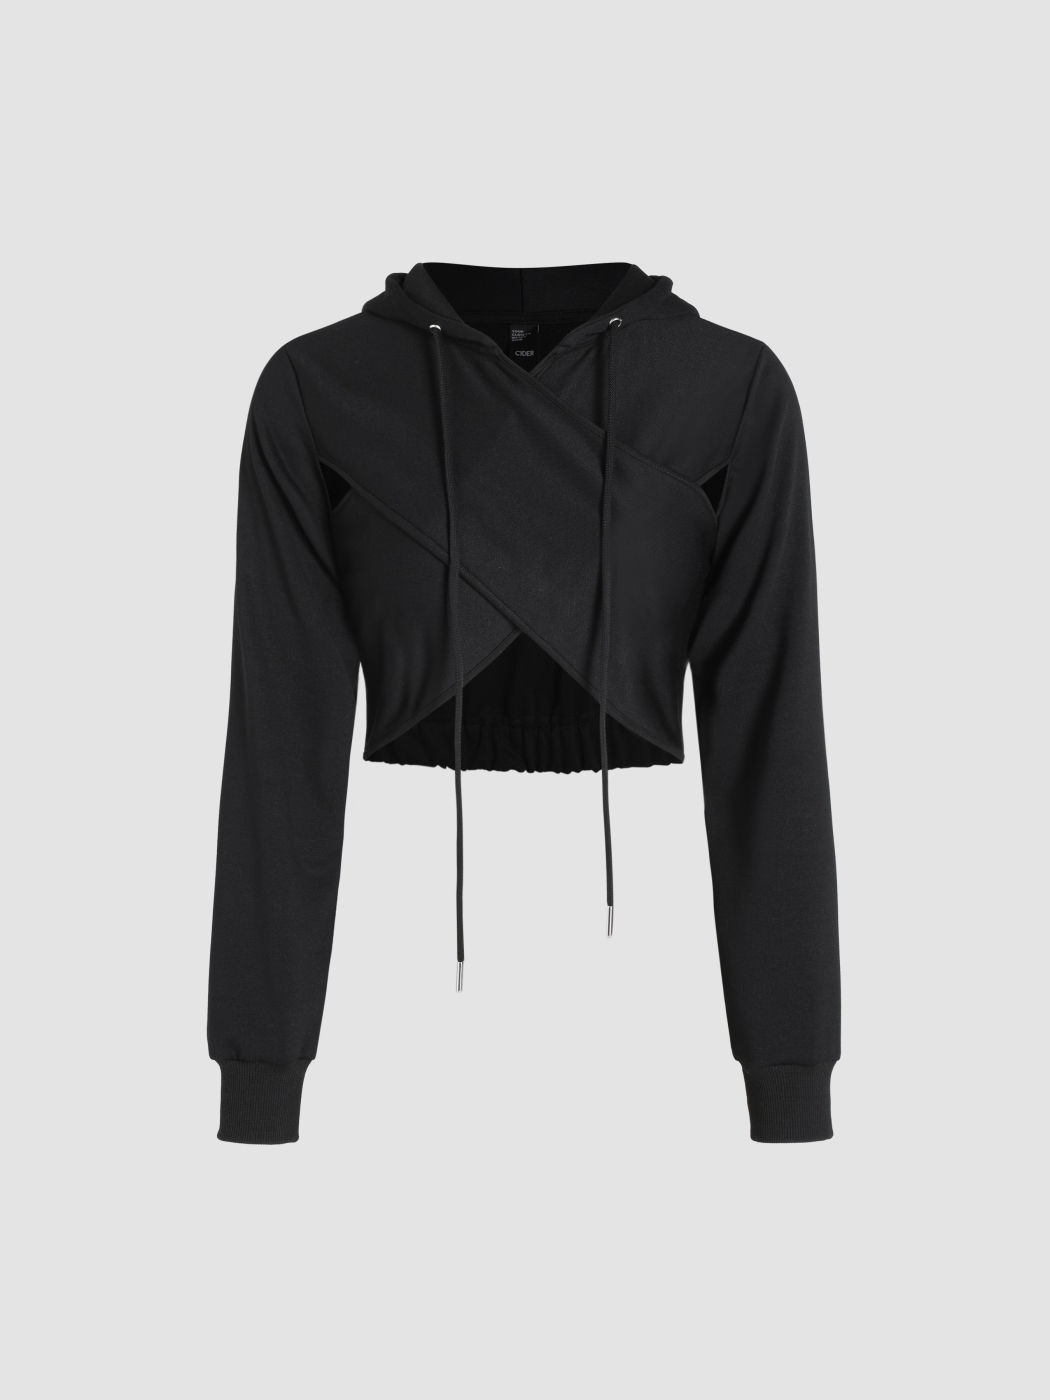 Criss Cross Drawstring Cut Out Hoodie - Cider